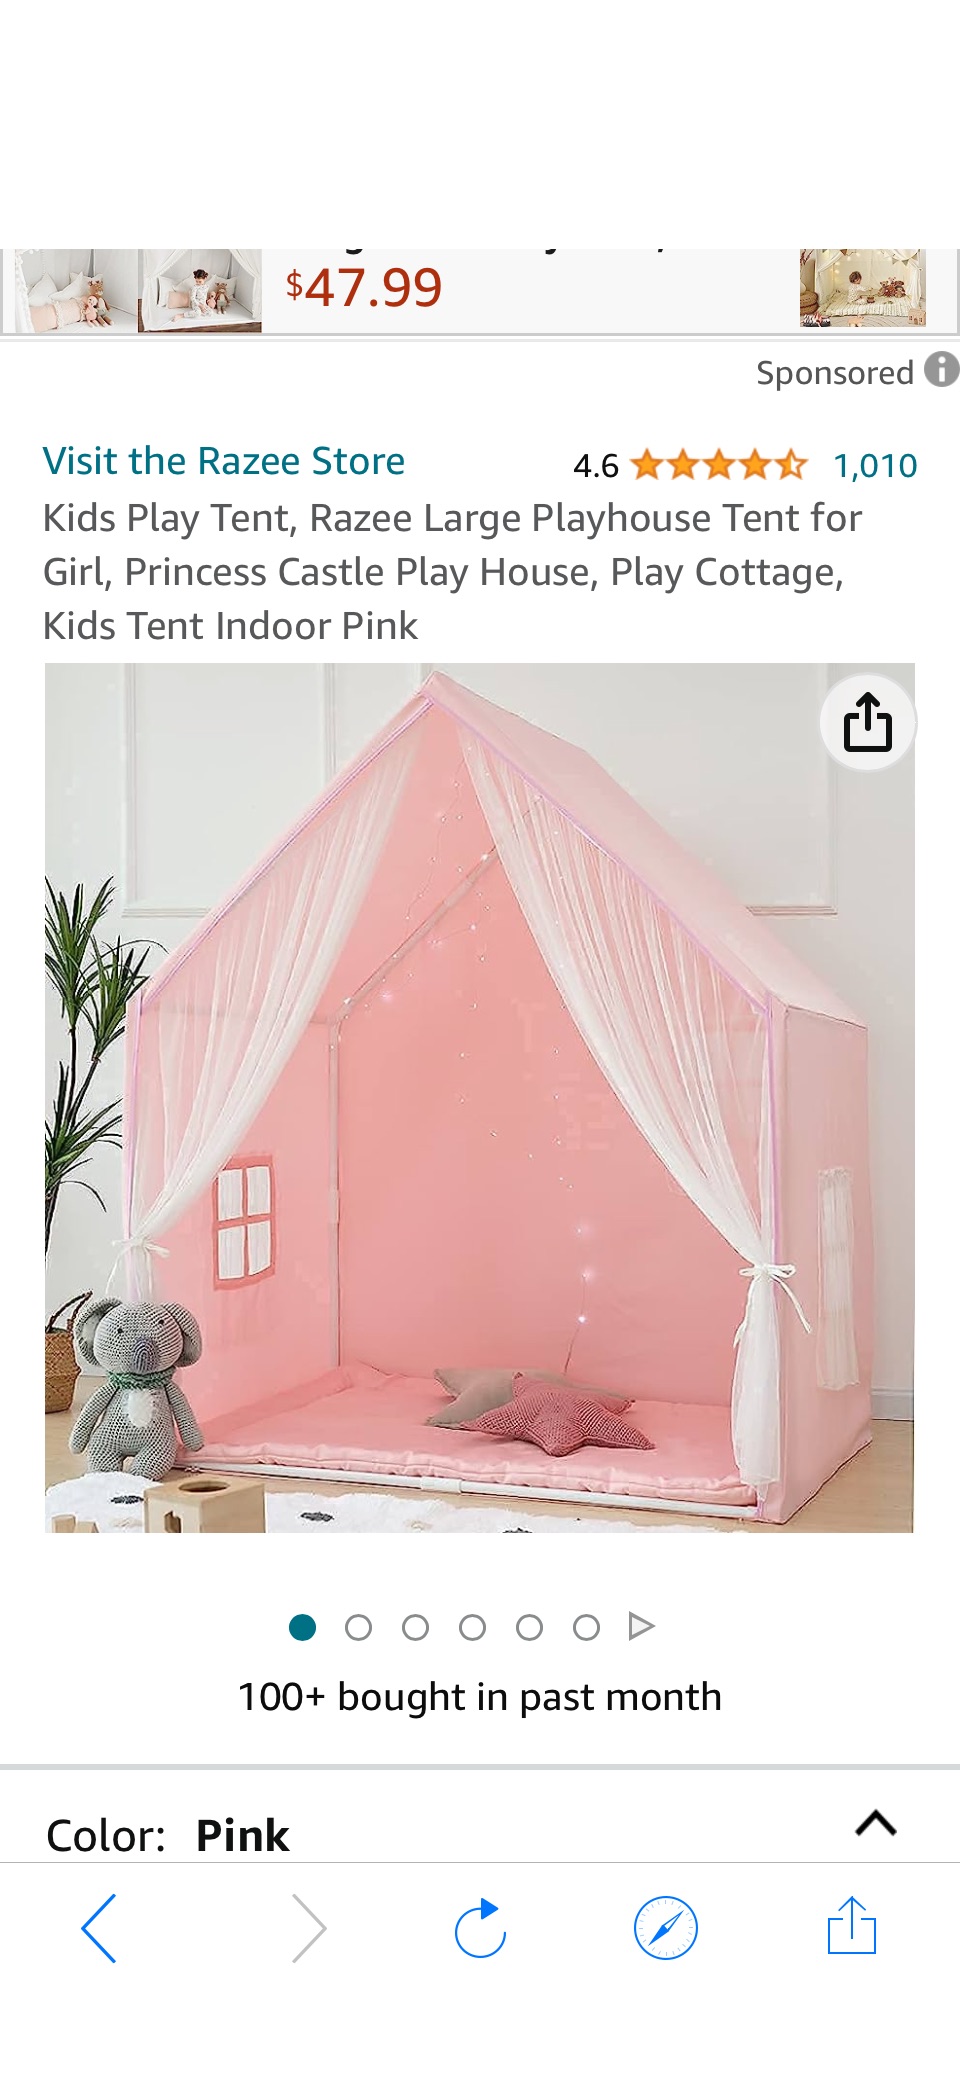 Amazon.com: Kids Play Tent, Razee Large Playhouse Tent for Girl, Princess Castle Play House, Play Cottage, Kids Tent Indoor Pink : Toys & Games 原价99.99